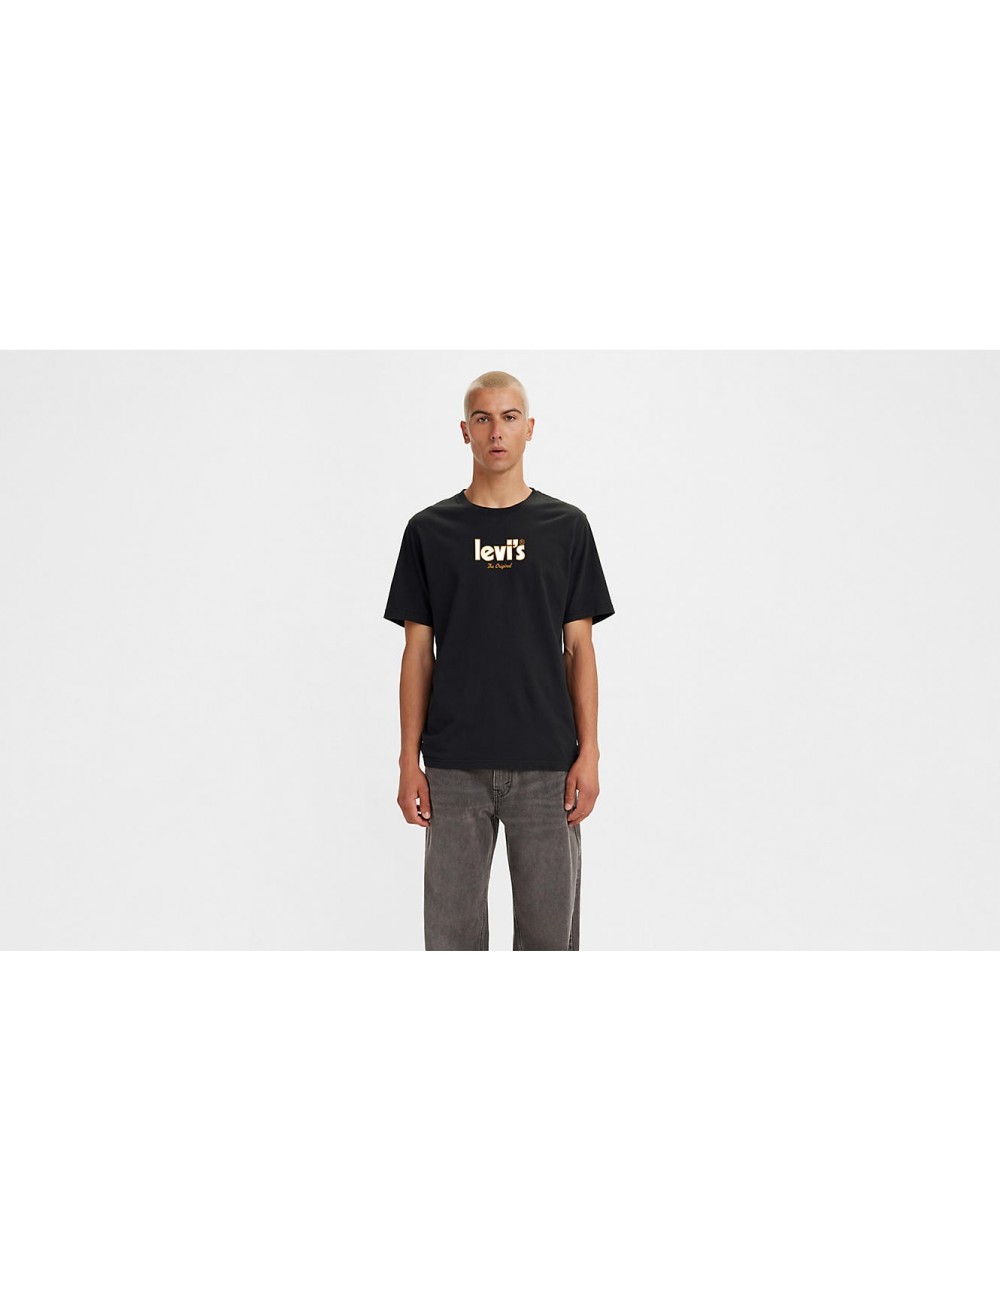 levis ss relaxed fit tee holiday poster caviar